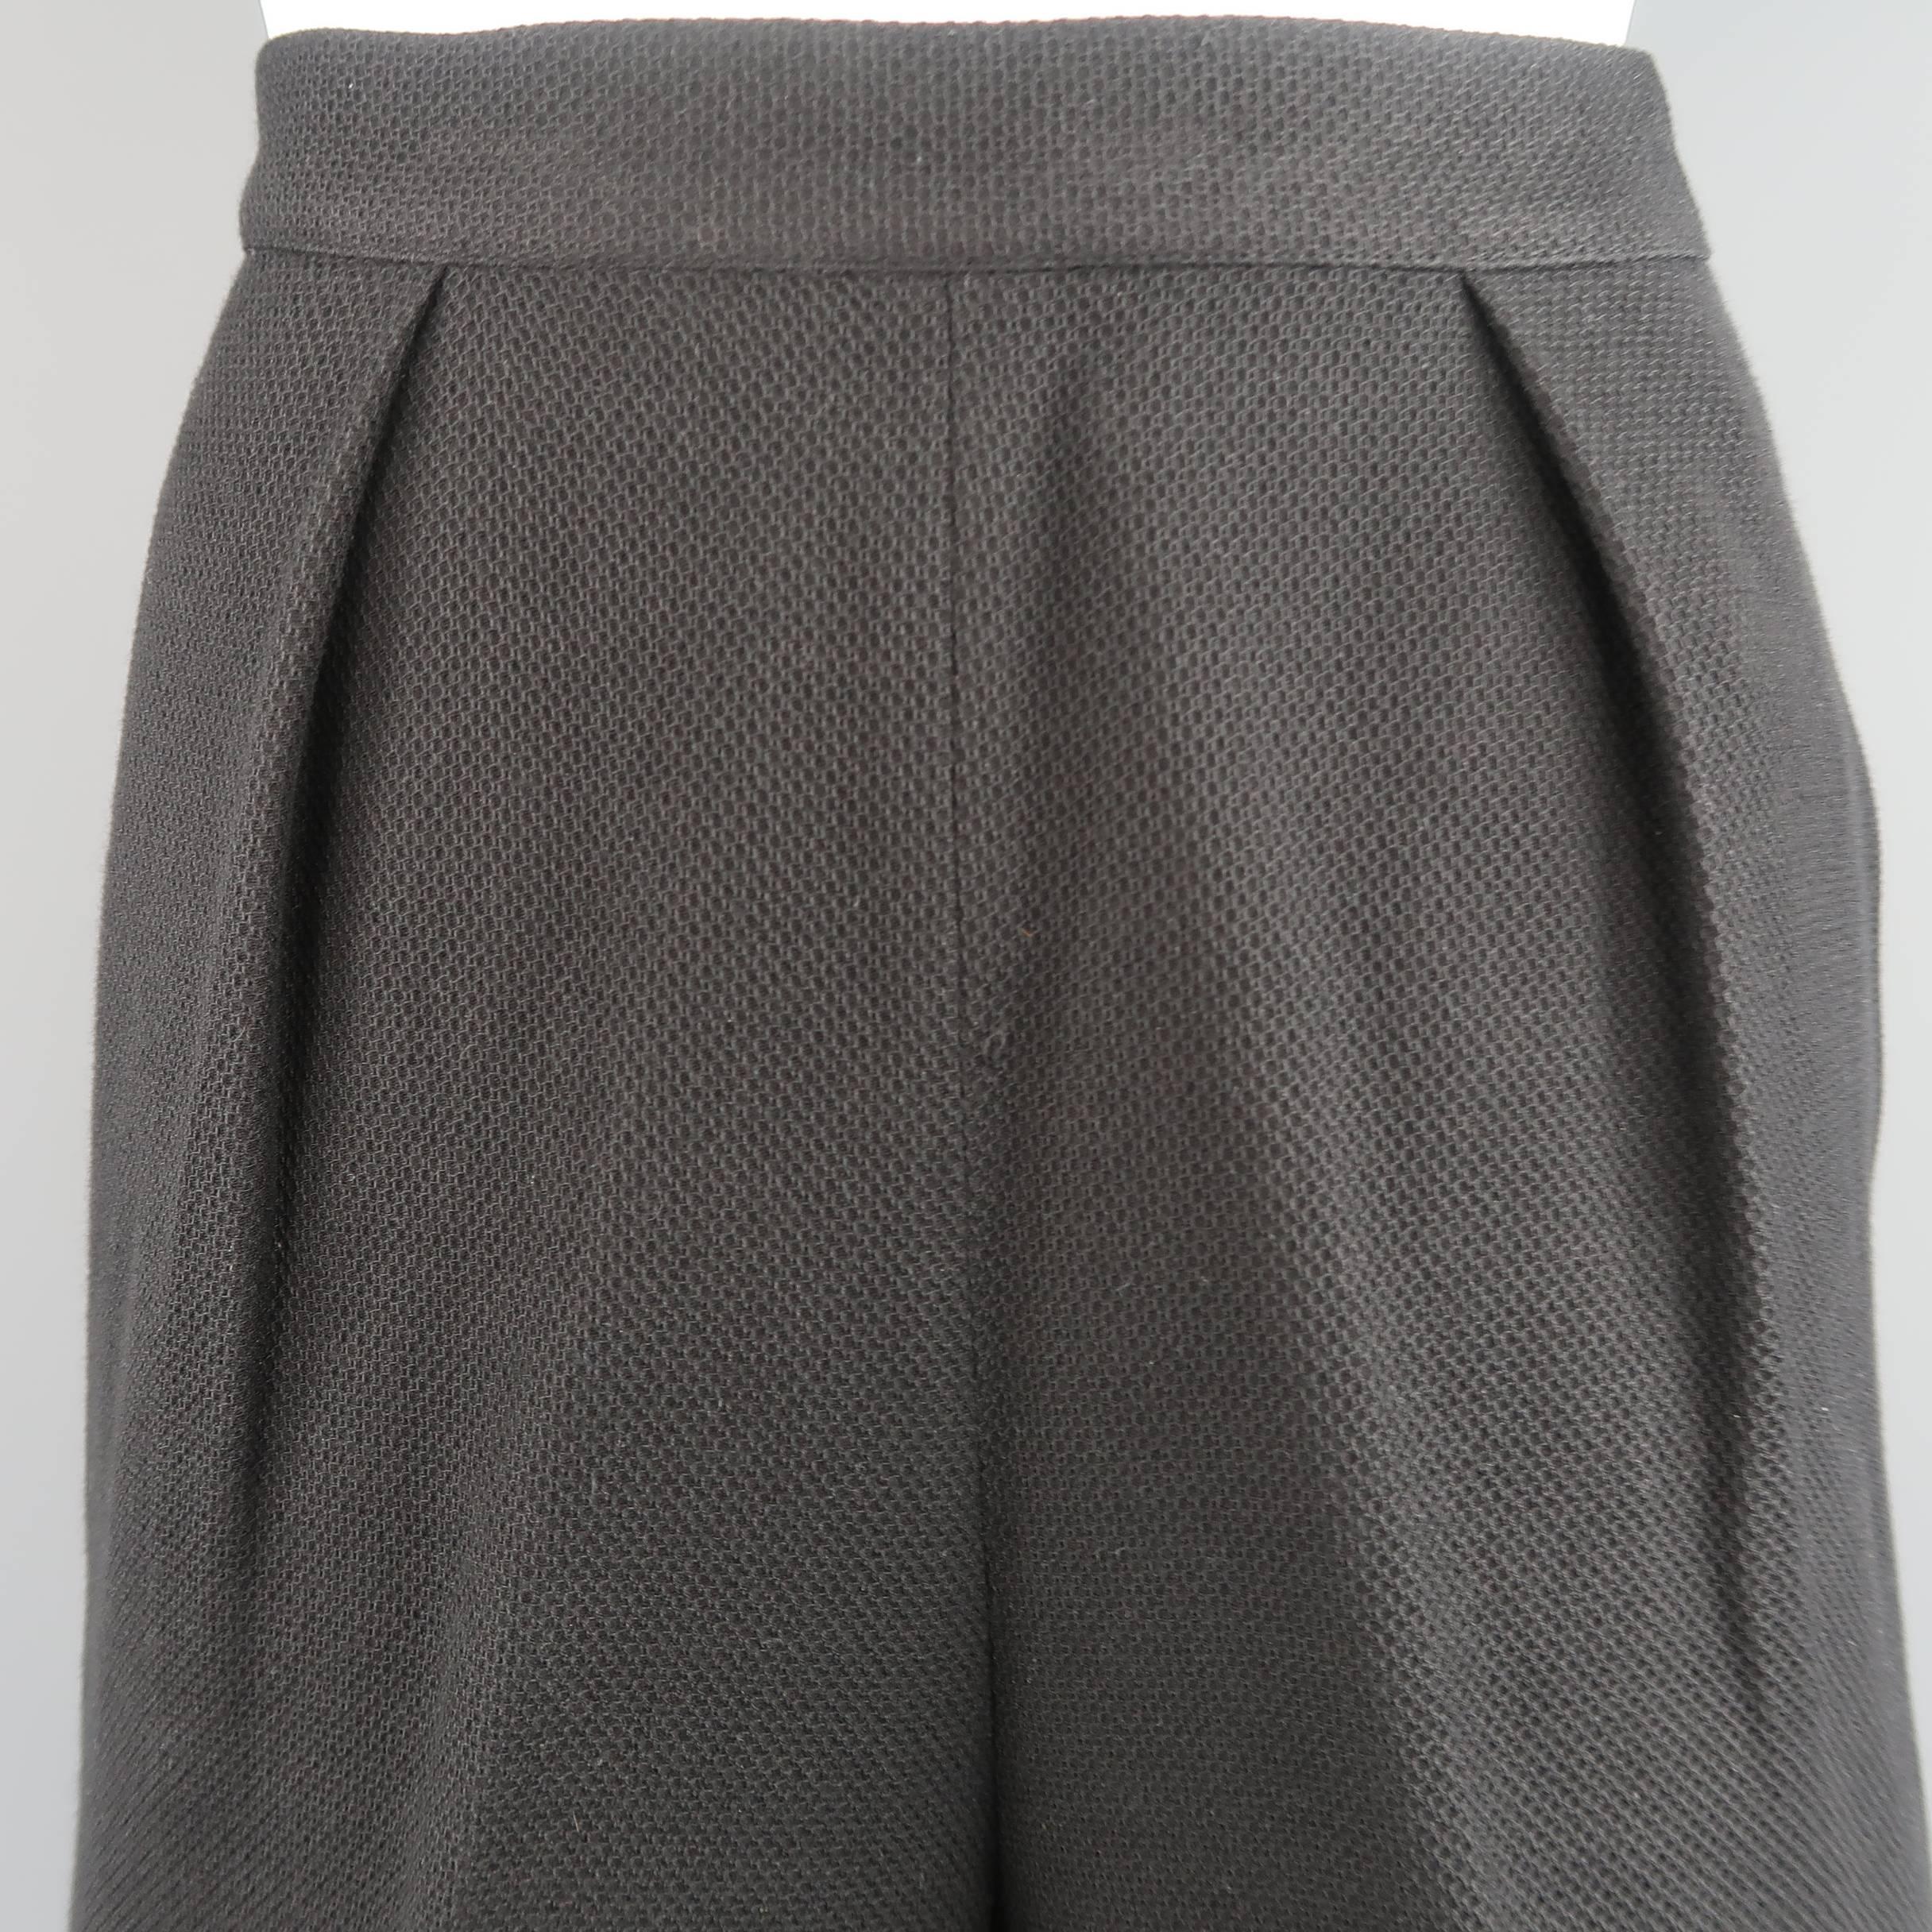 Vintage CHANEL Bermuda shorts come in a textured woven cotton fabric and feature a high rise, pleated front, and side pockets. Made in France.
 
Good Pre-Owned Condition.
Marked: FR 38
 
Measurements:
 
Waist: 27 in.
Hip: 38 in.
Rise: 12 in.
Inseam: